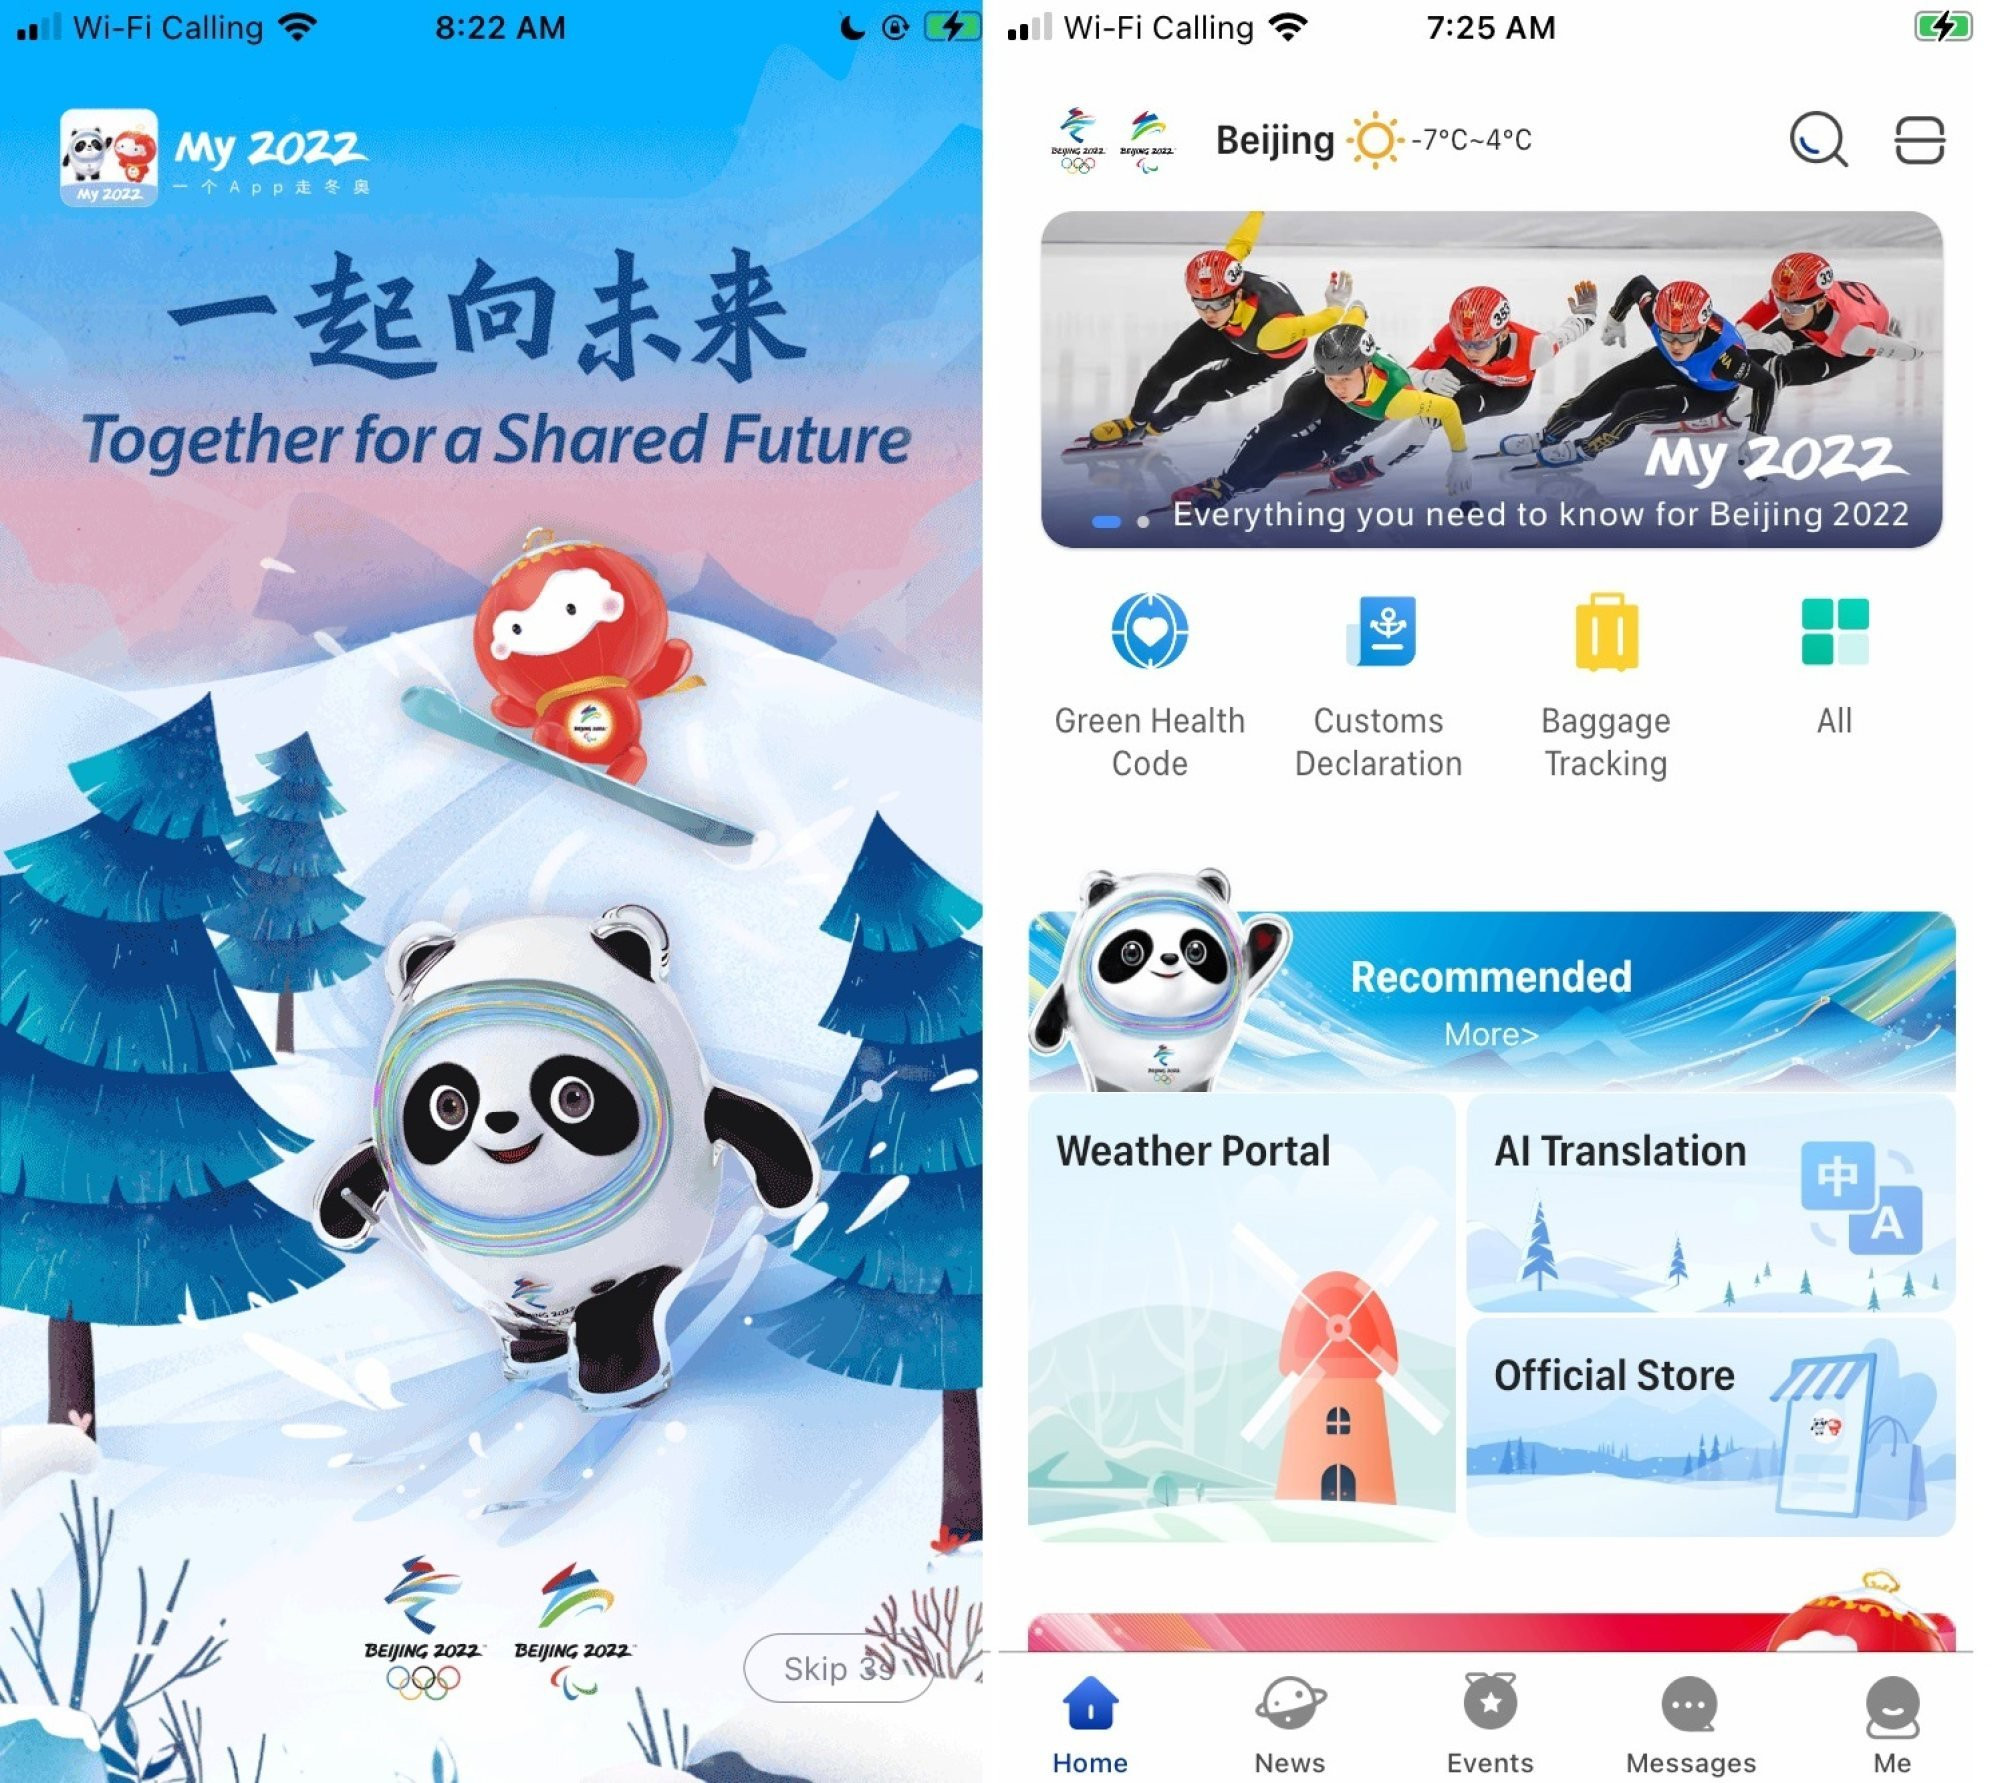 Games participants have had to upload health information to the controversial My2022 application ©Beijing 2022